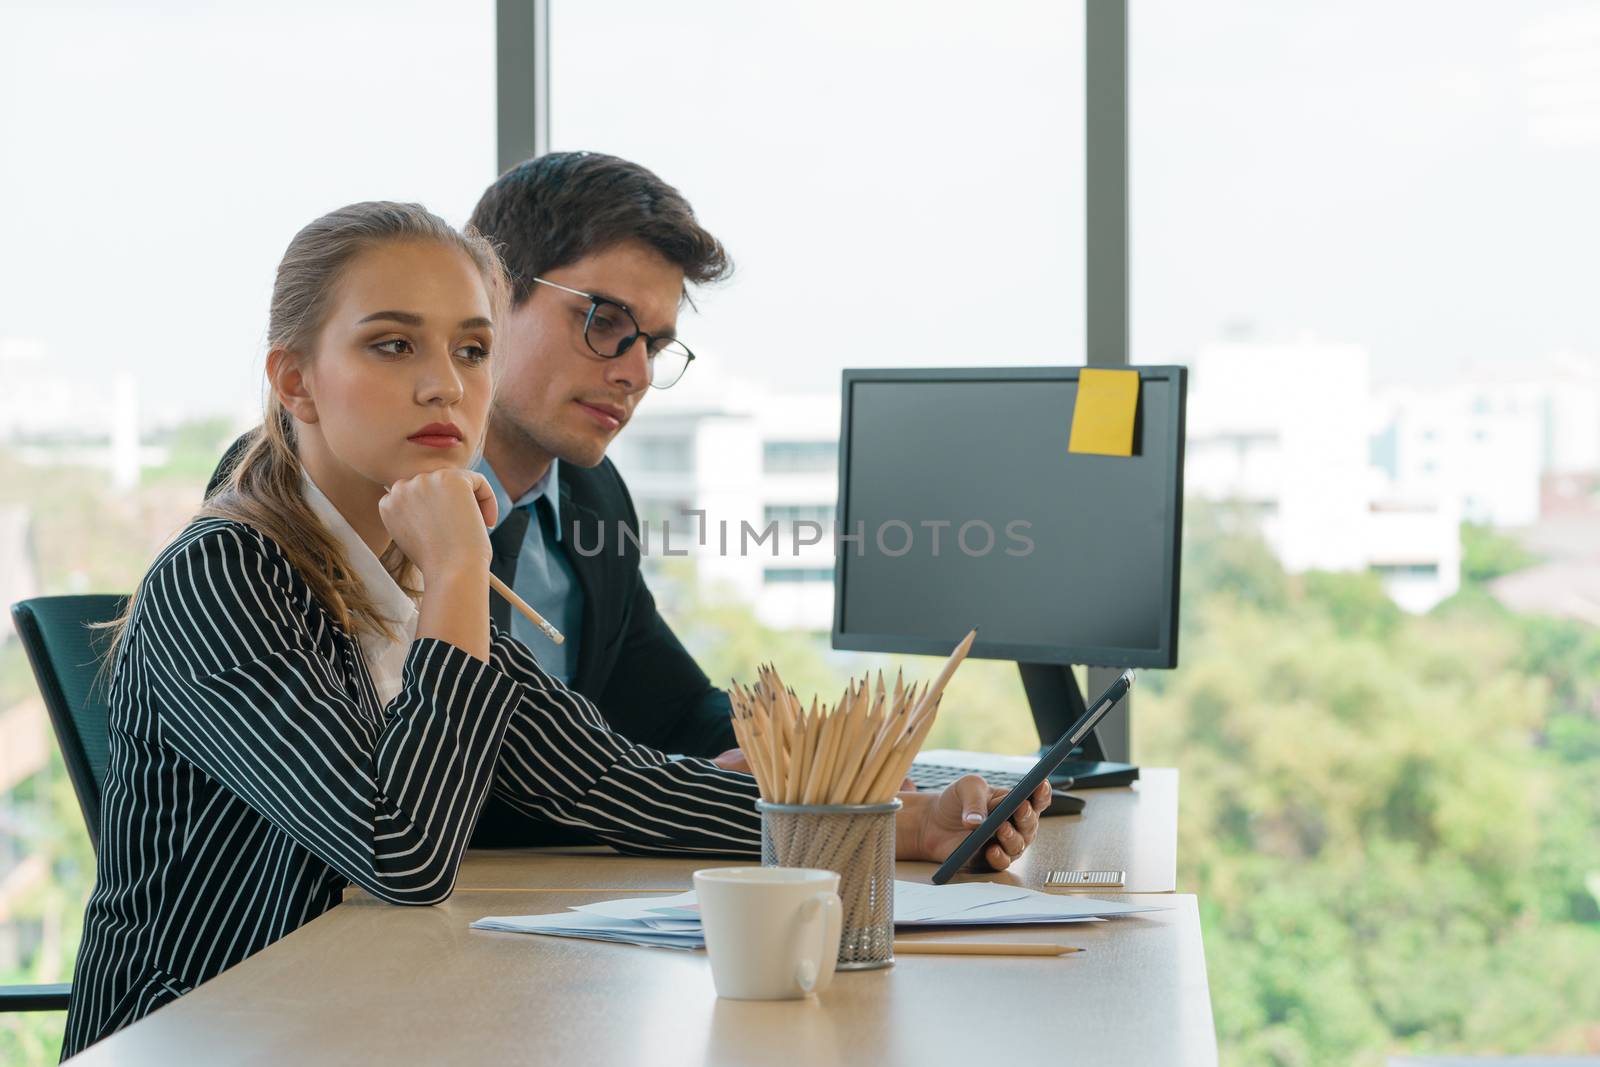 Teenager employees made a disgruntled expression of colleagues after the meeting. The man in the suit sat vacant at his desk. Morning work atmosphere In a modern office.